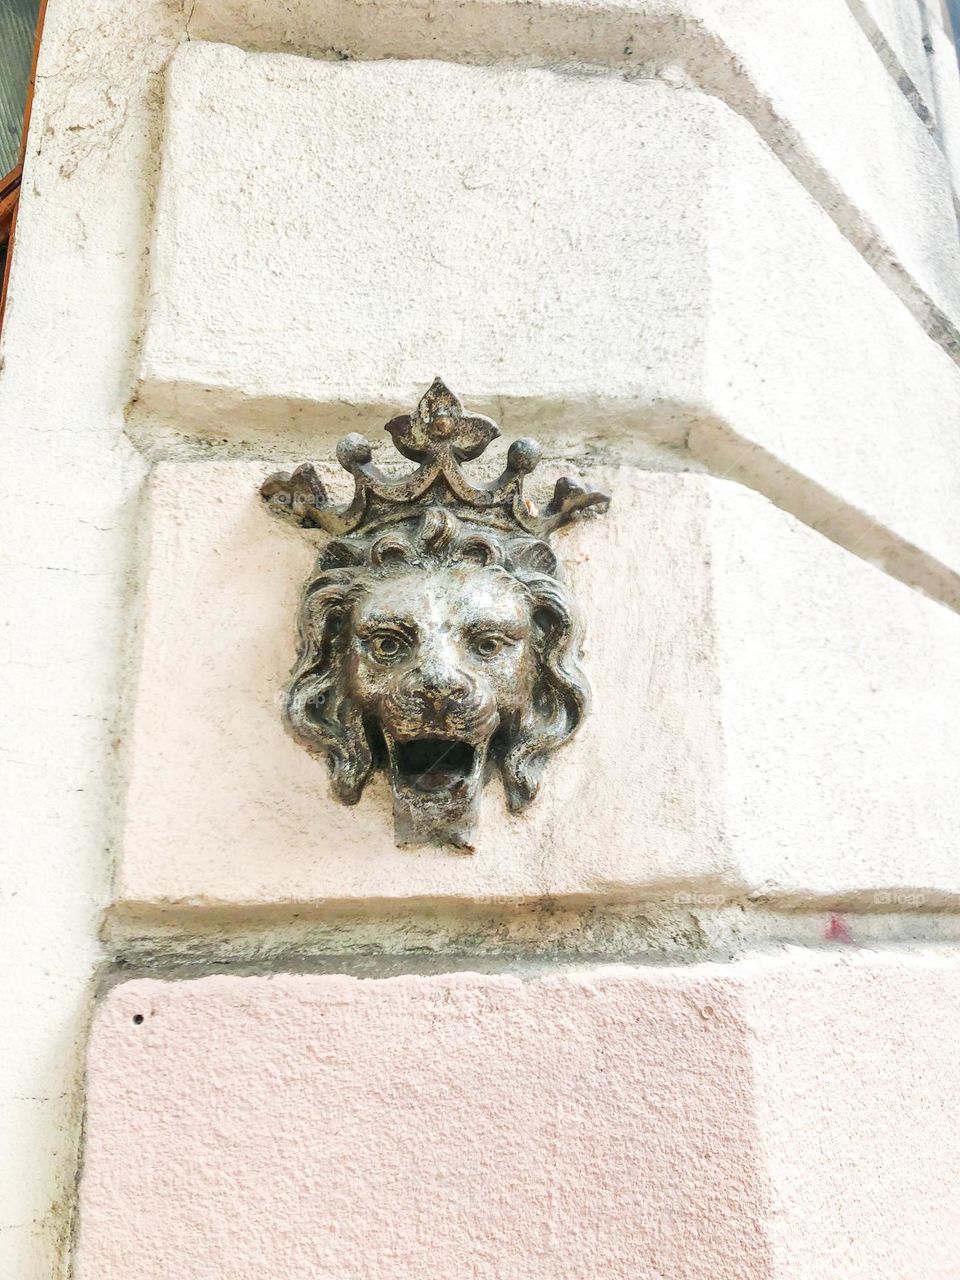 Metal sculpture of a lion with crown on an old building 